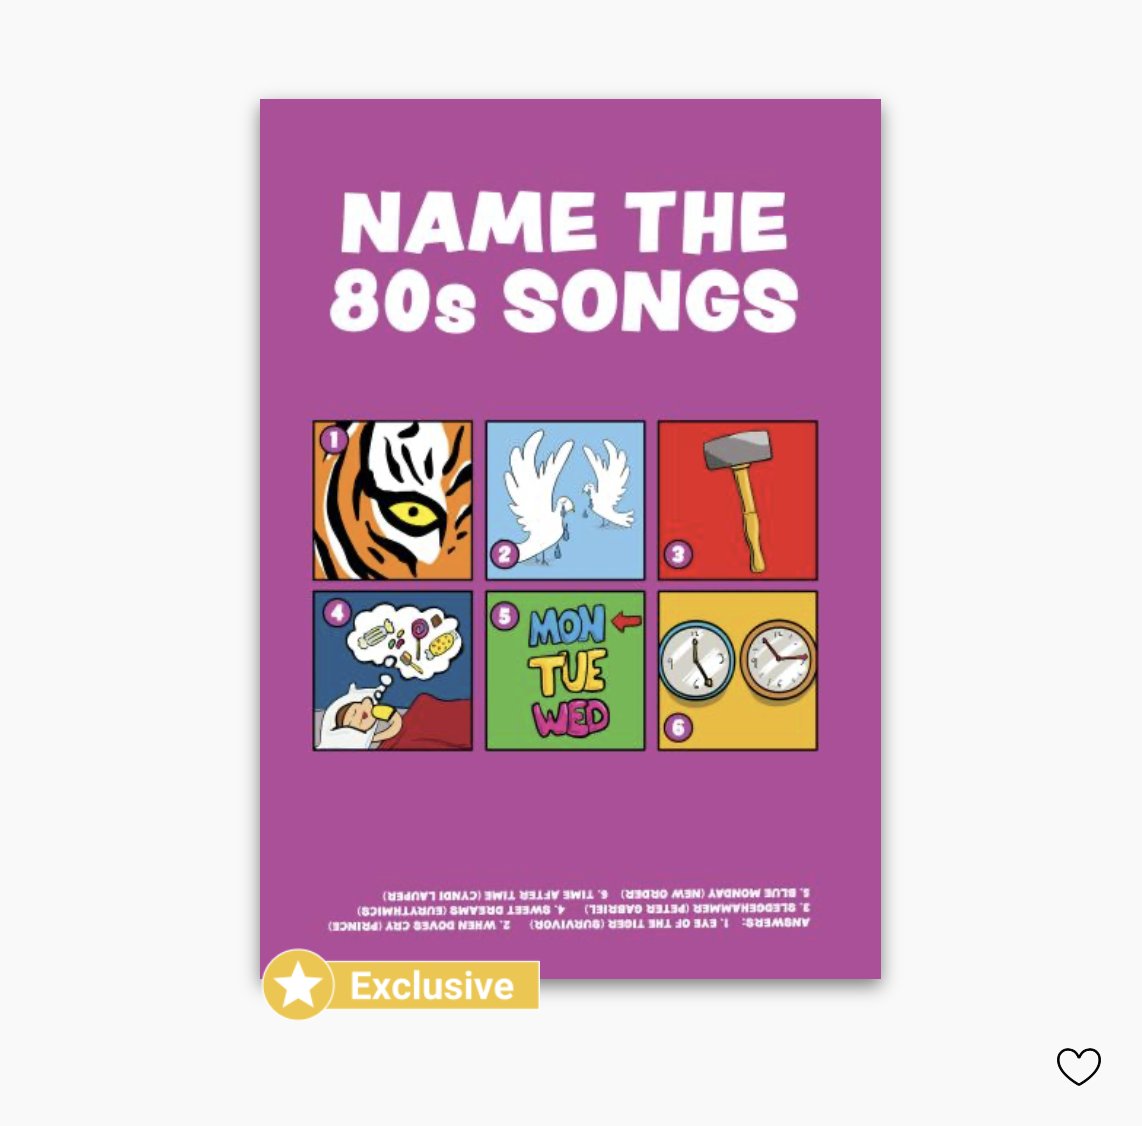 Does your mum love the 80s? Does she love chocolate. Then send her an exclusive Tony's Chocolonely card with my 80s music picture quiz Use code 'TONYSFORMUM' to get 25% off !! thortful.com/gifts/656f287e… (Disclosure: I receive a tiny payment from purchases made through this link)